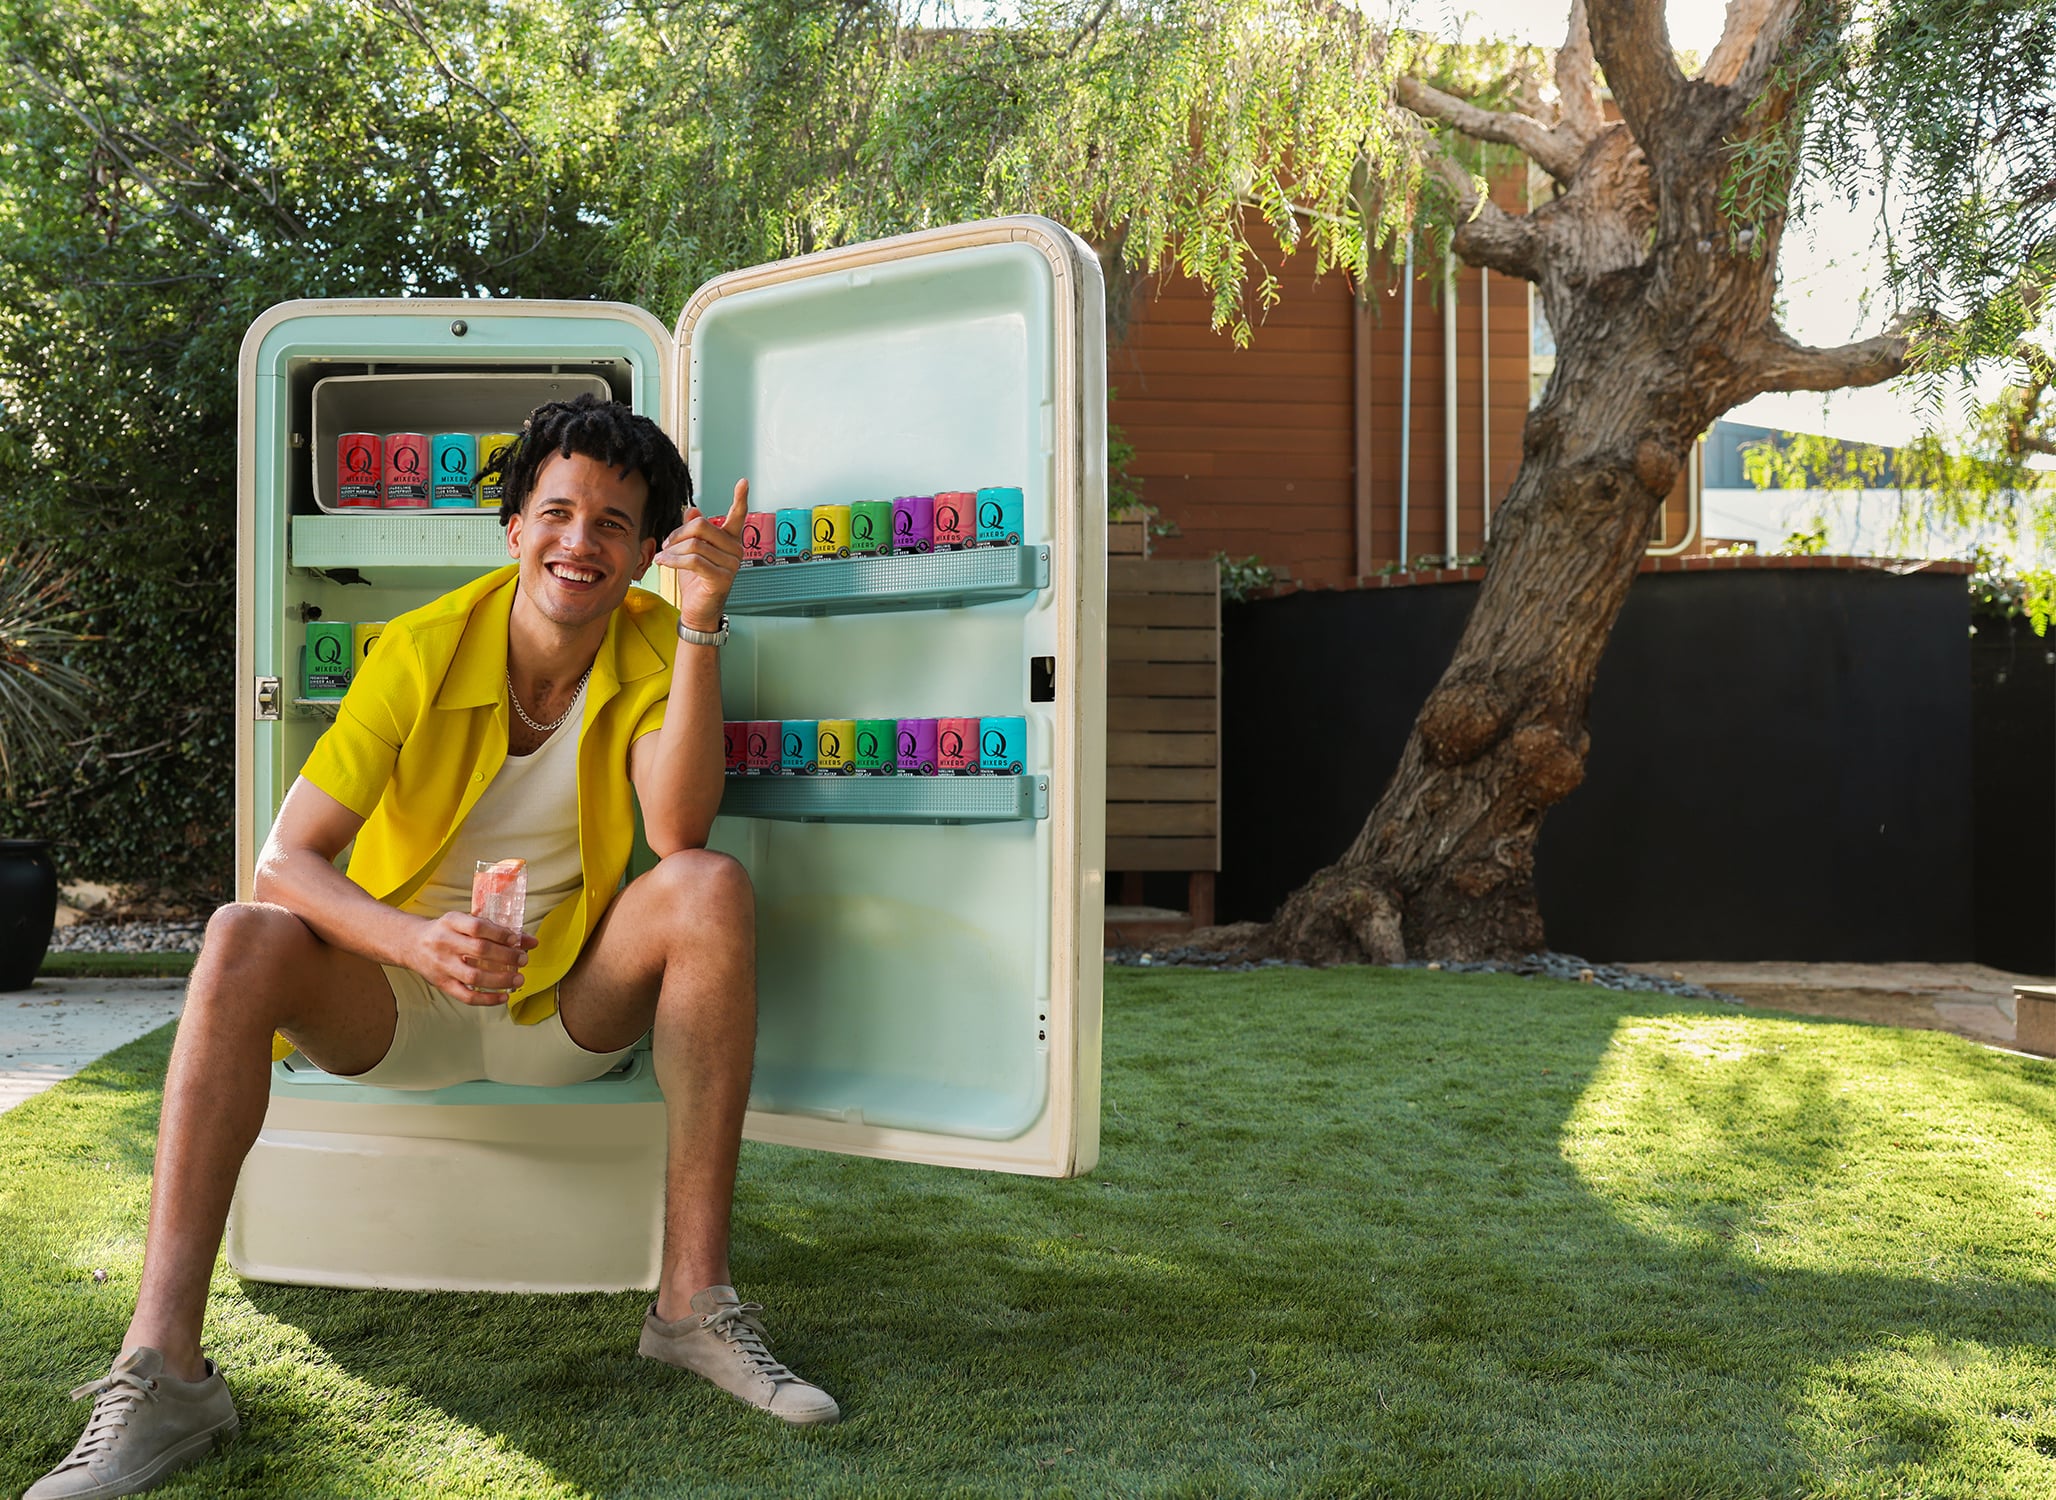 A young man in Summer clothing sits by a fridge filled with Q Mixers cans in a sunny backyard